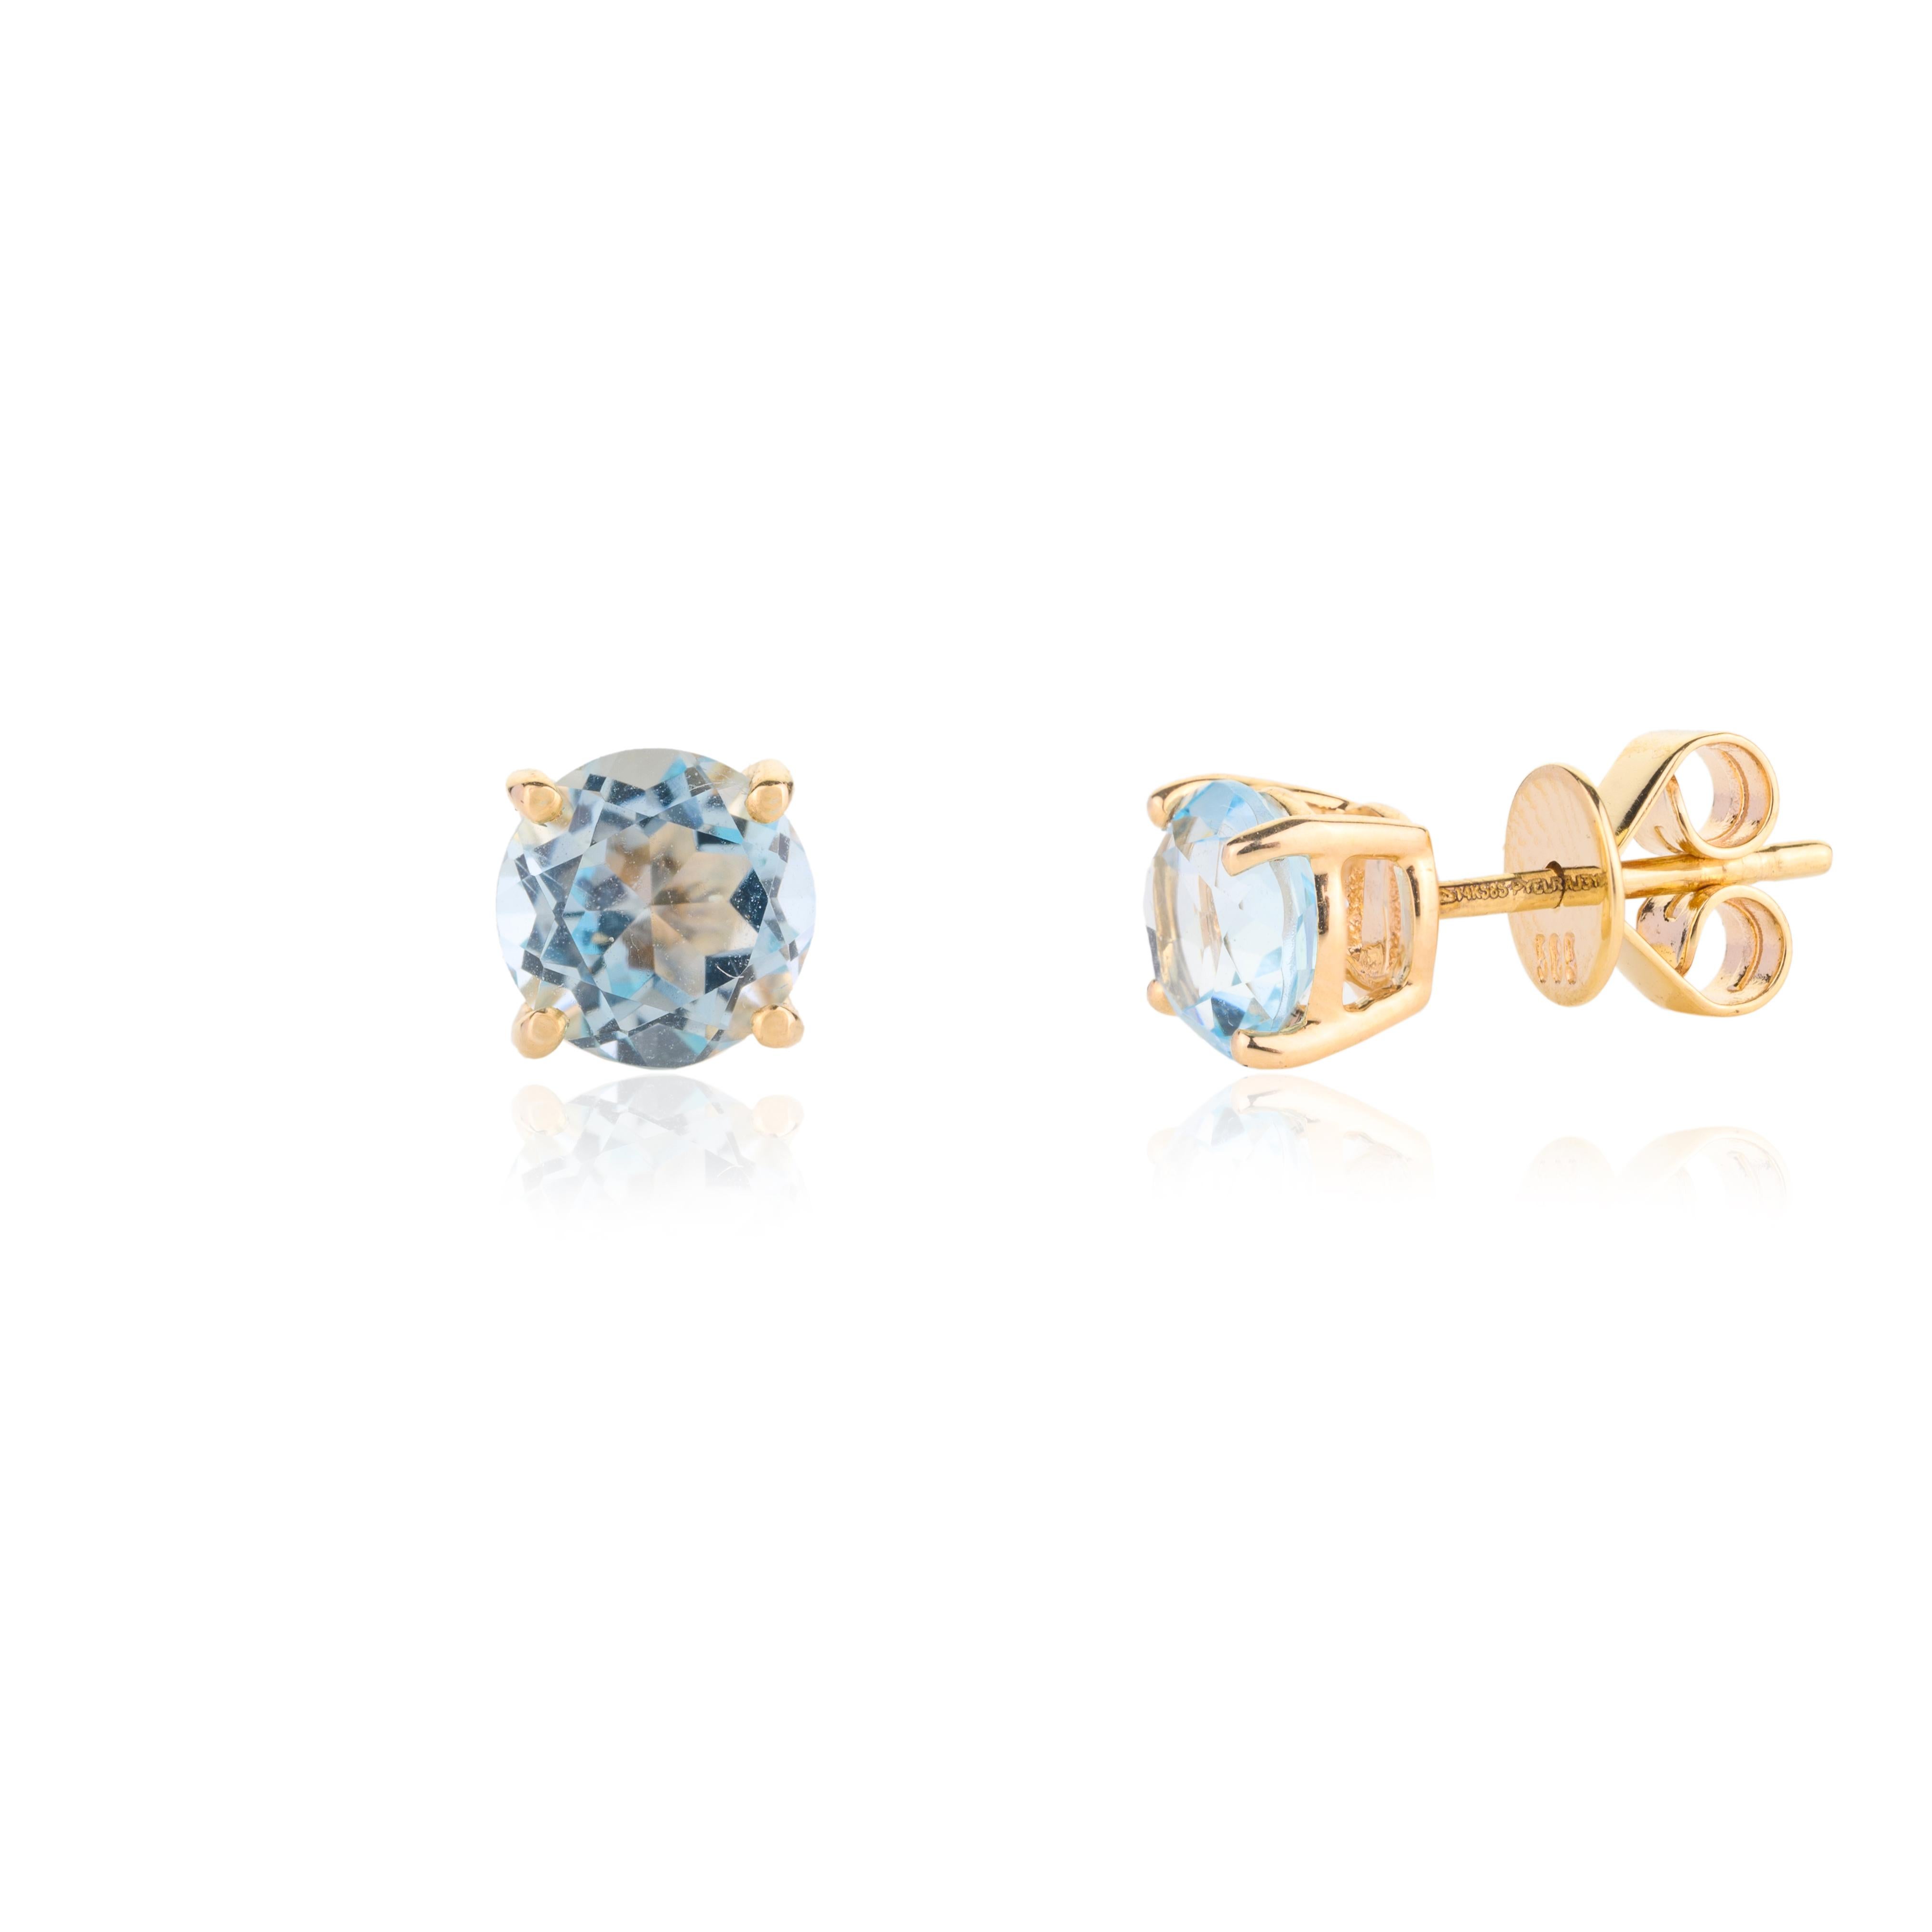 Modern 2.13 Carats Blue Topaz Pushback Stud Earrings for Her in 14k Solid Yellow Gold For Sale